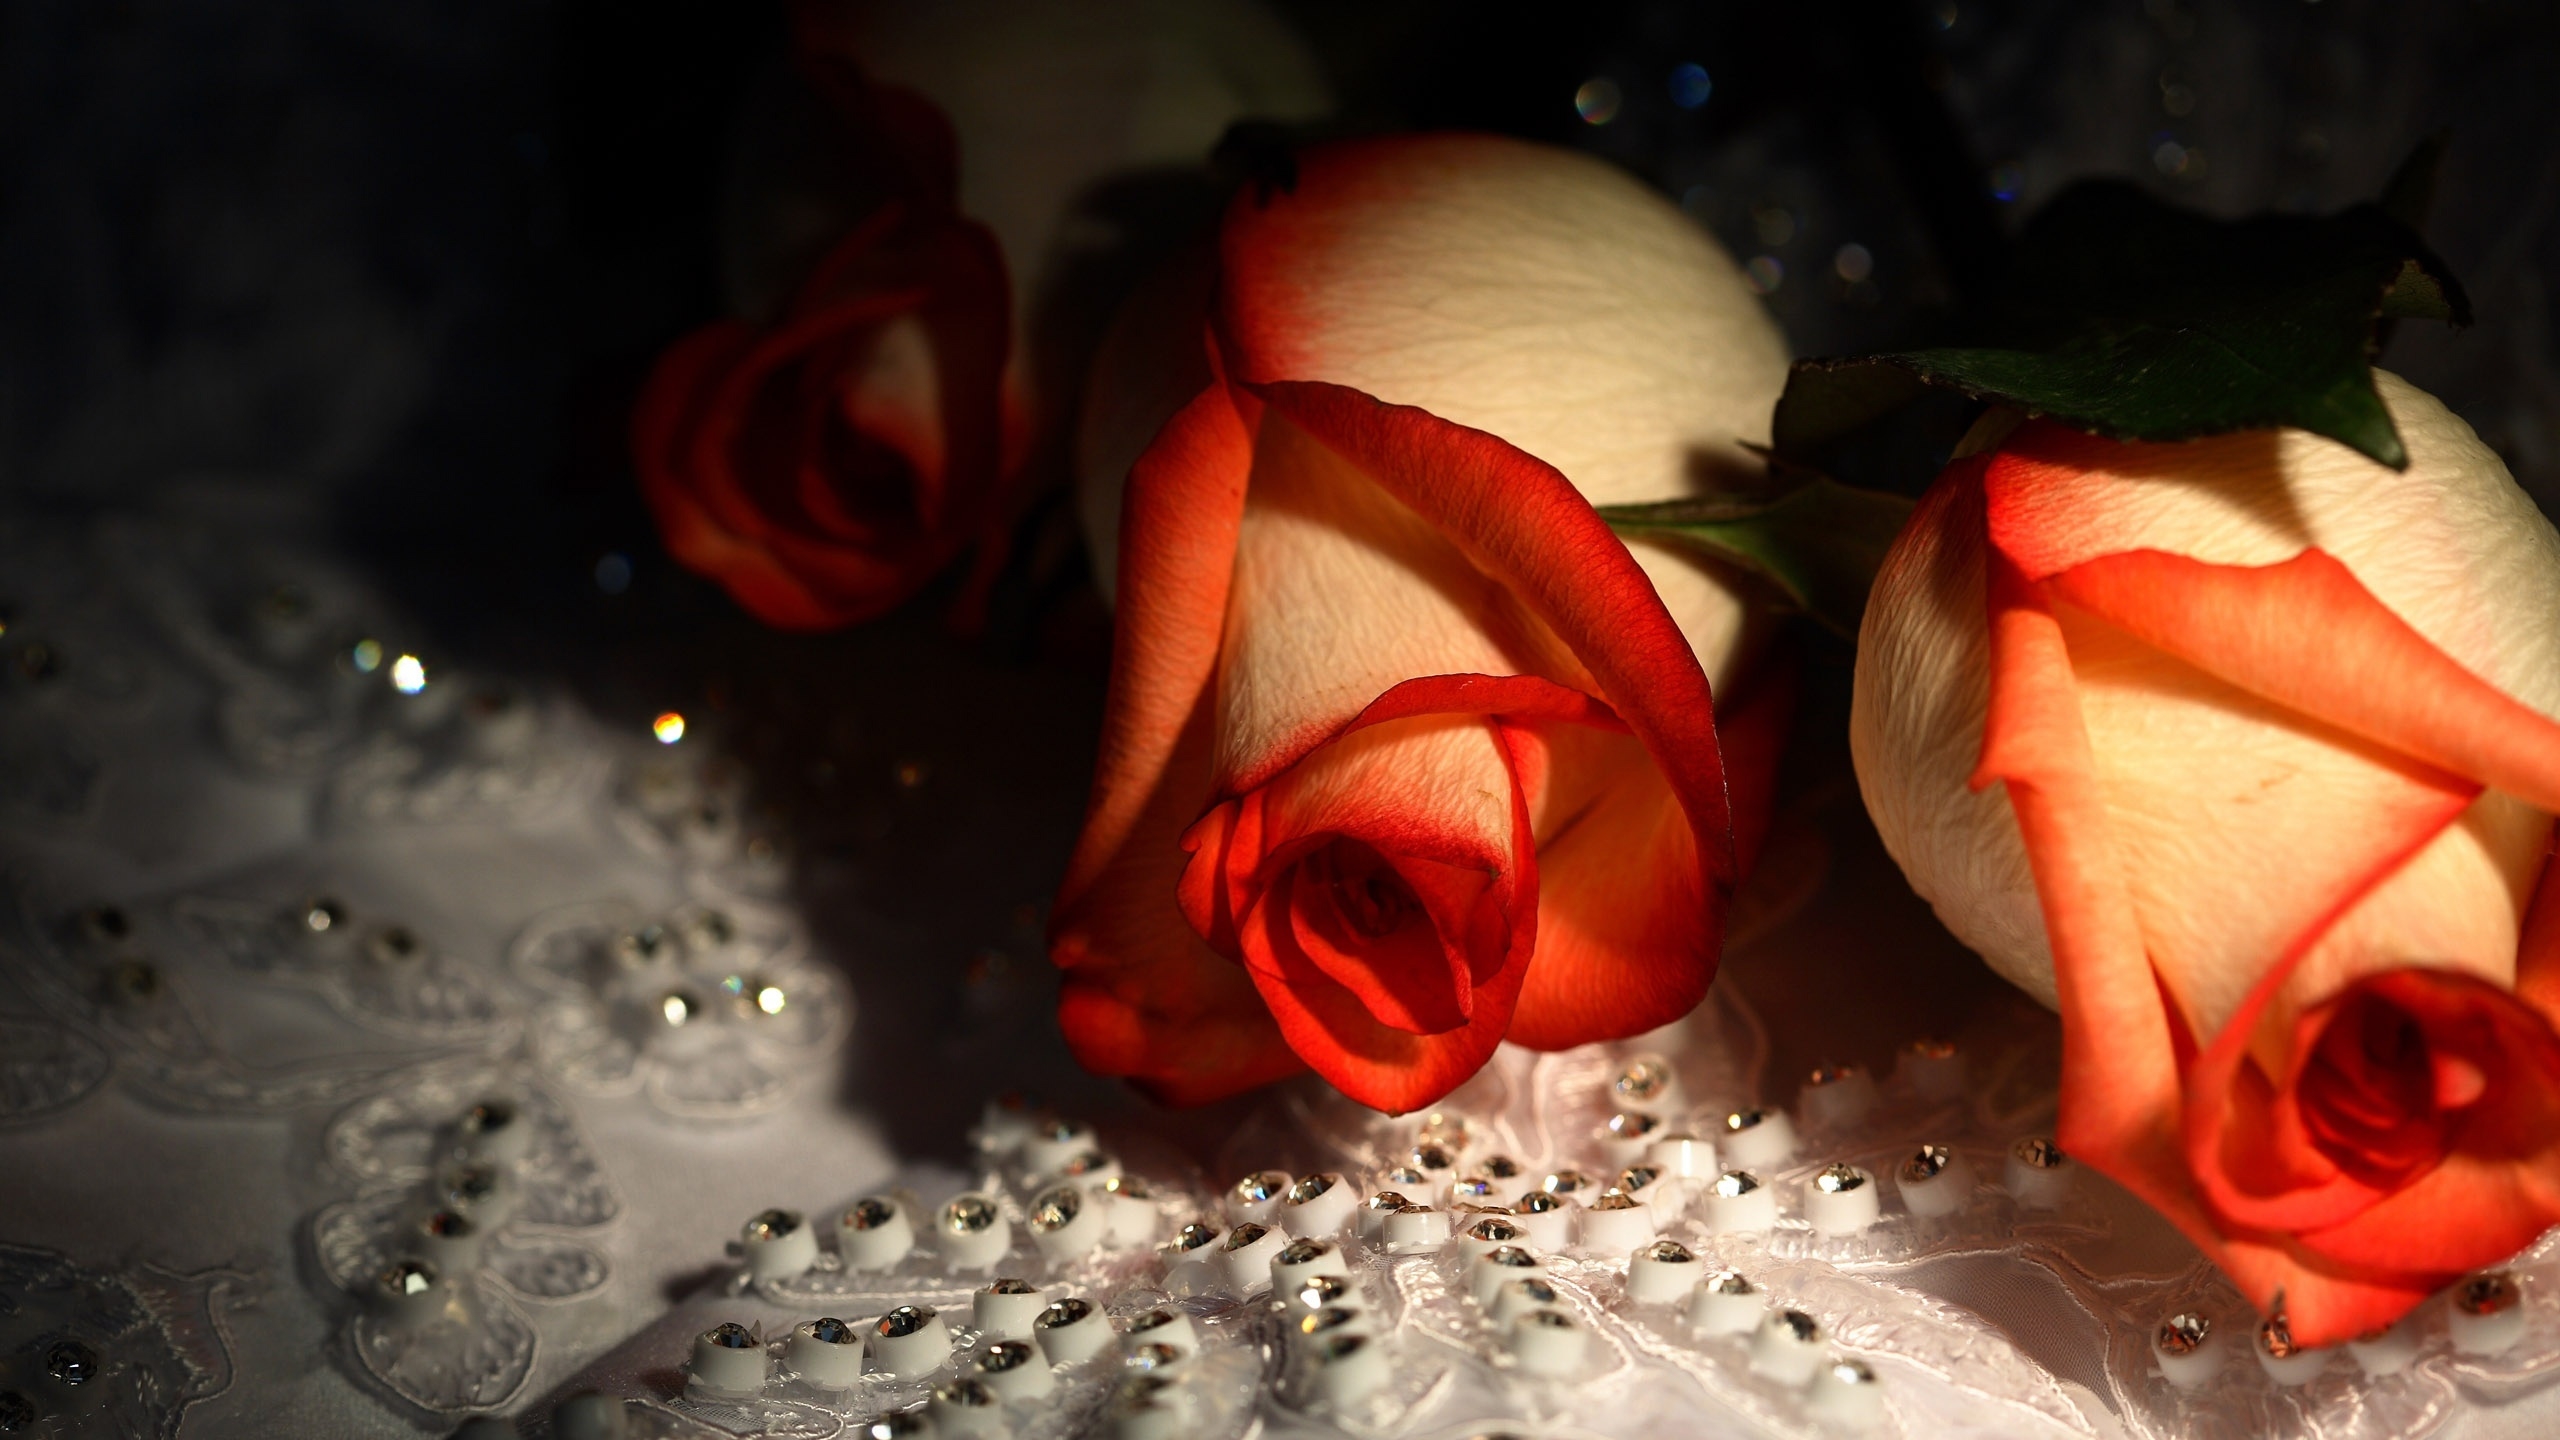 Diamonds and Roses for 2560x1440 HDTV resolution